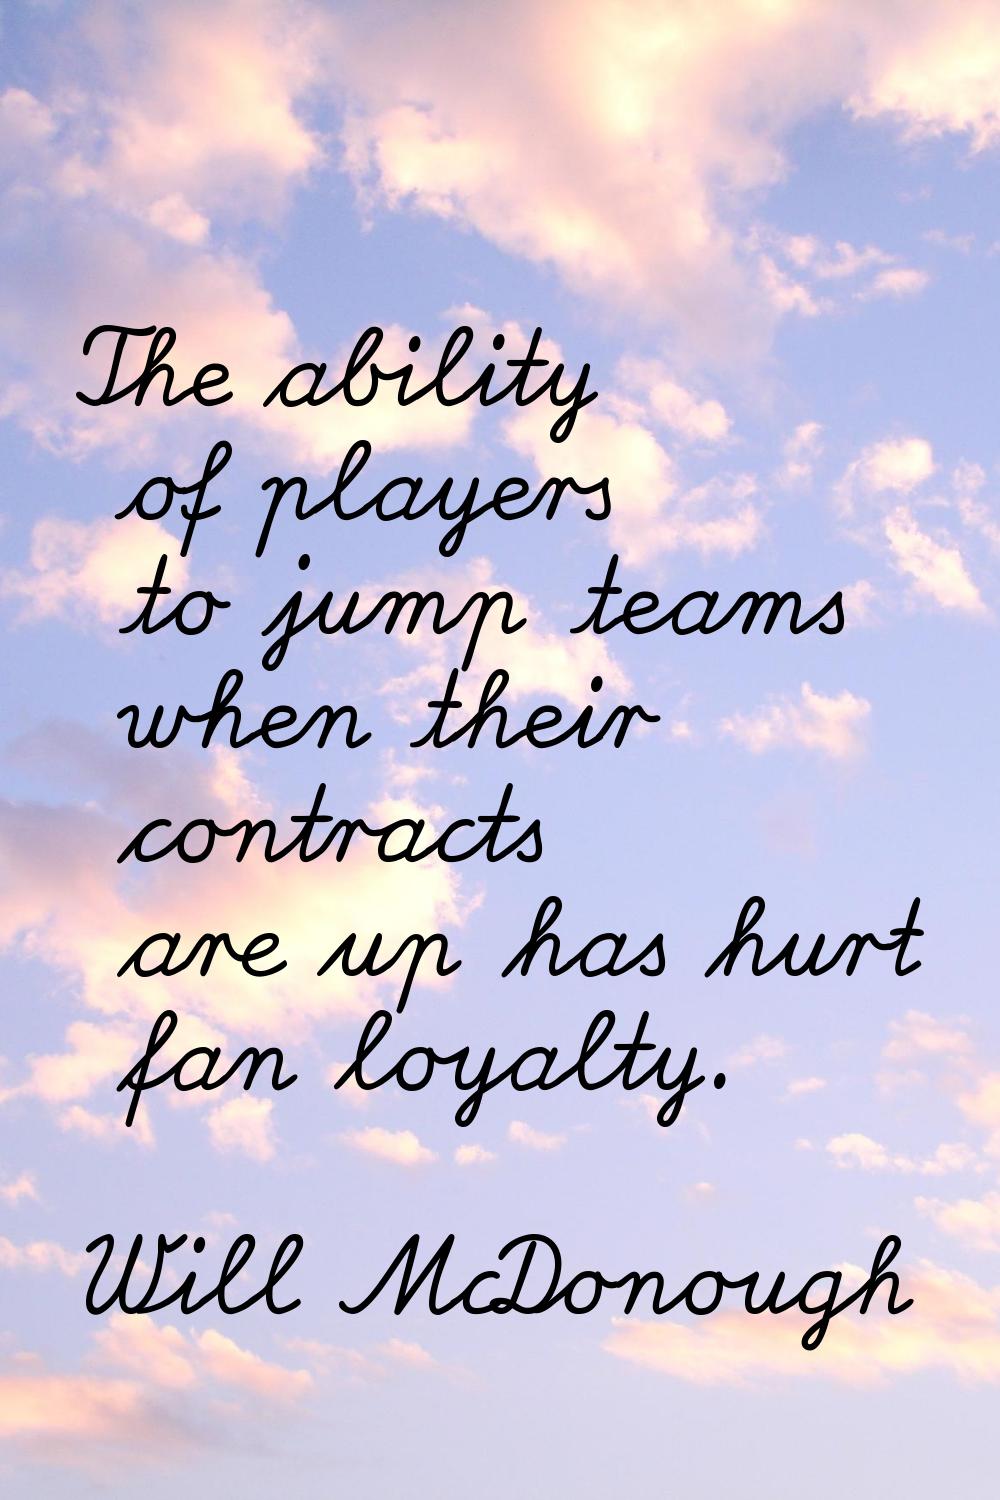 The ability of players to jump teams when their contracts are up has hurt fan loyalty.